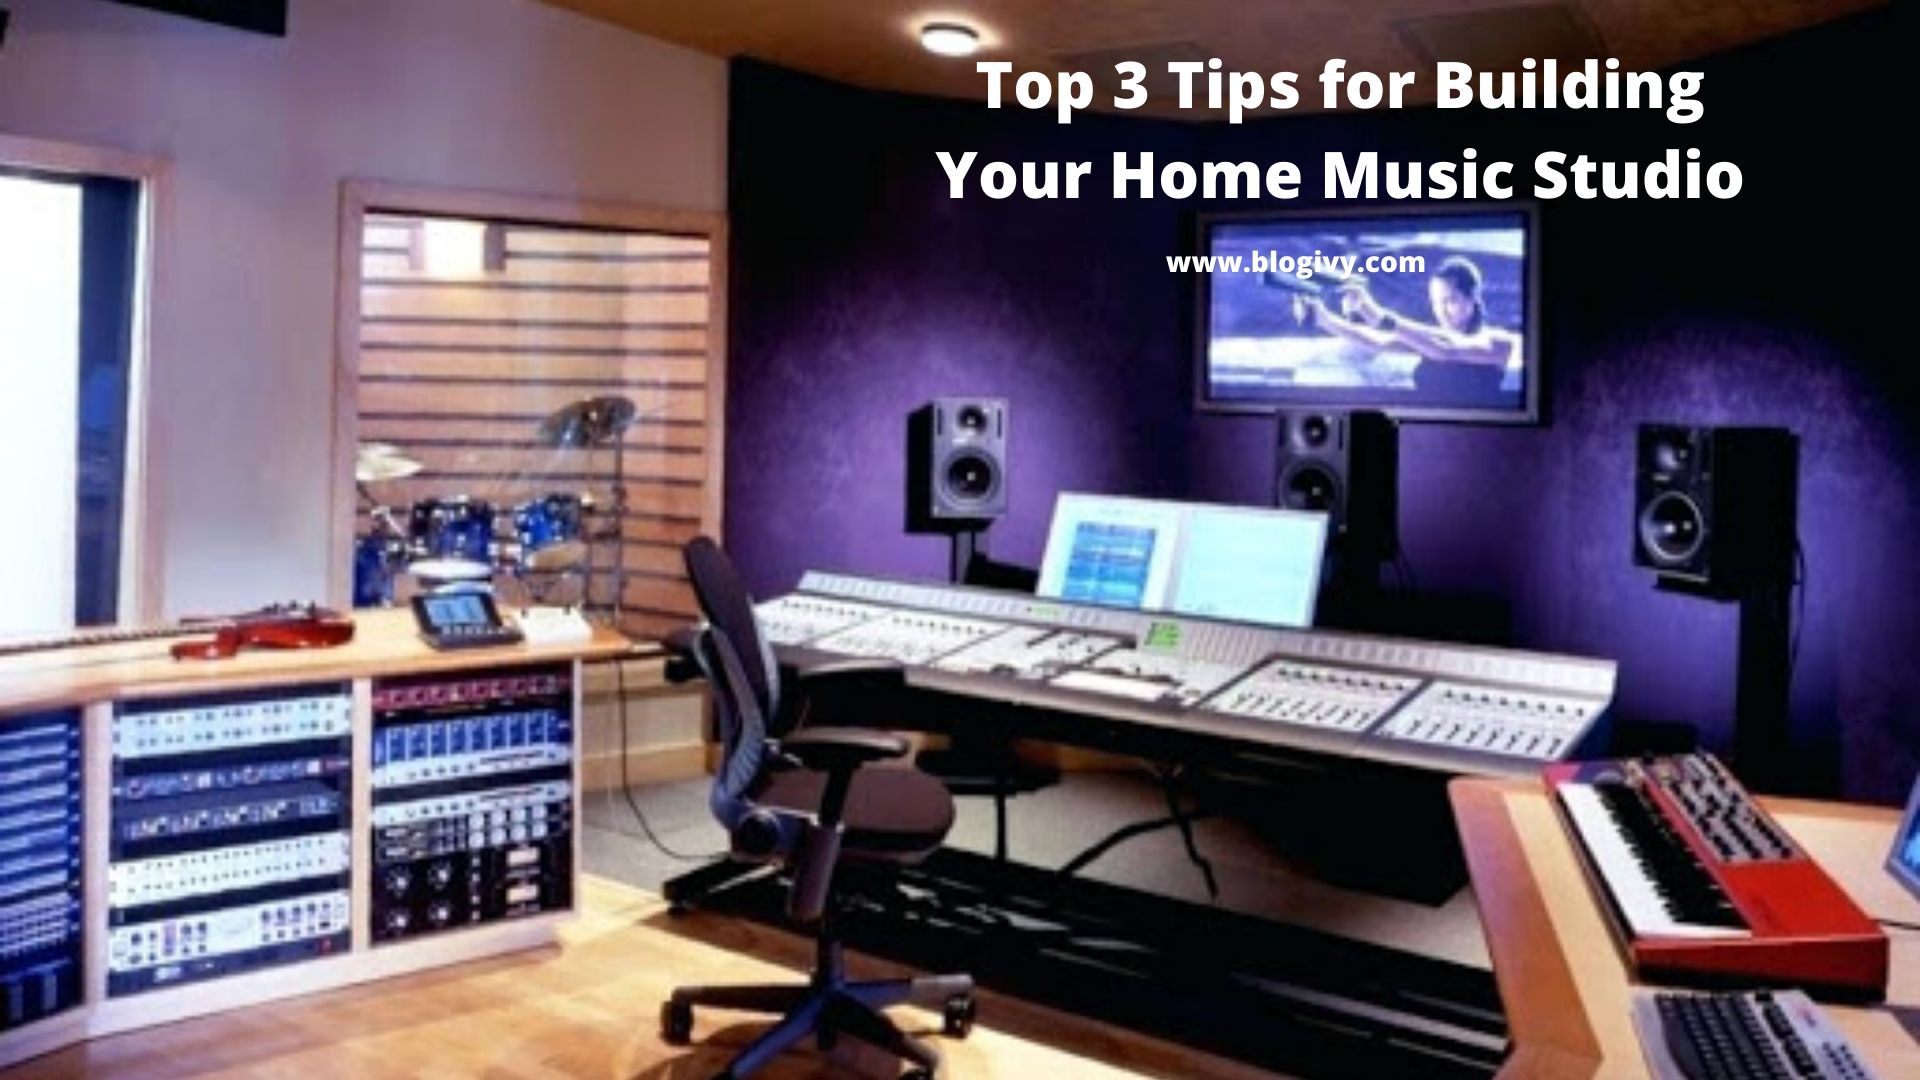 Top 3 Tips for Building Your Home Music Studio